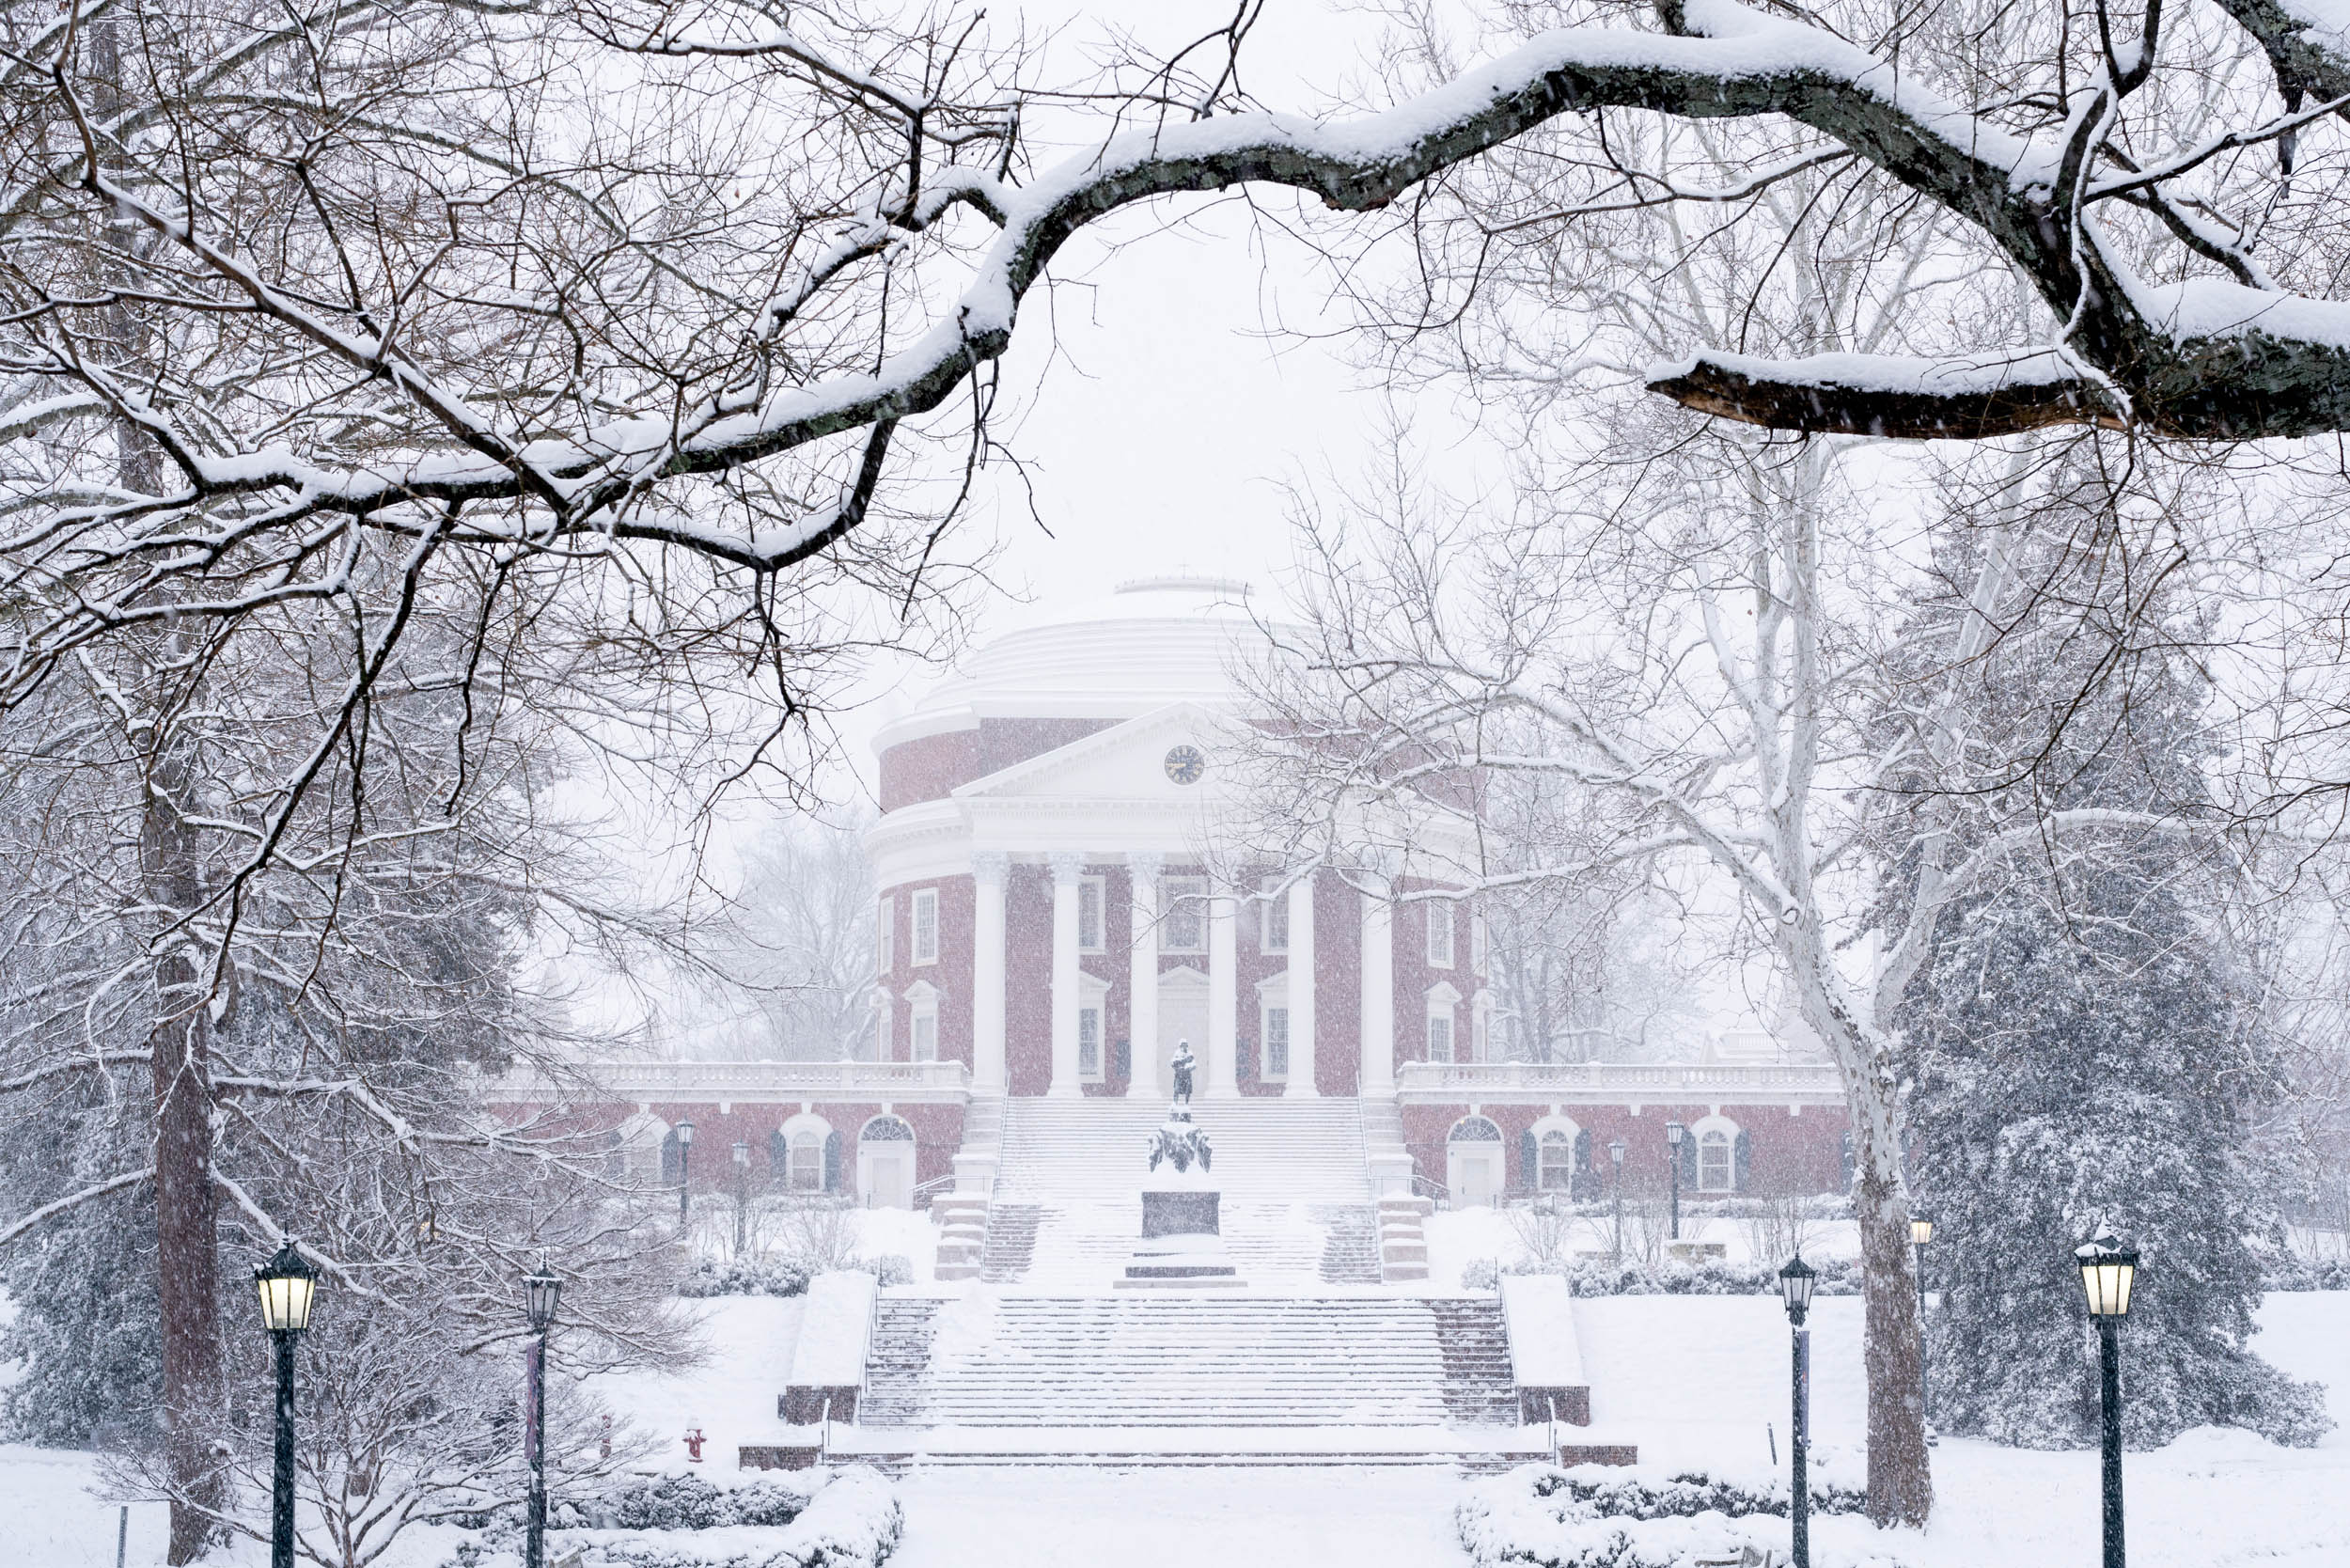 Rotunda getting covered in snow as it falls